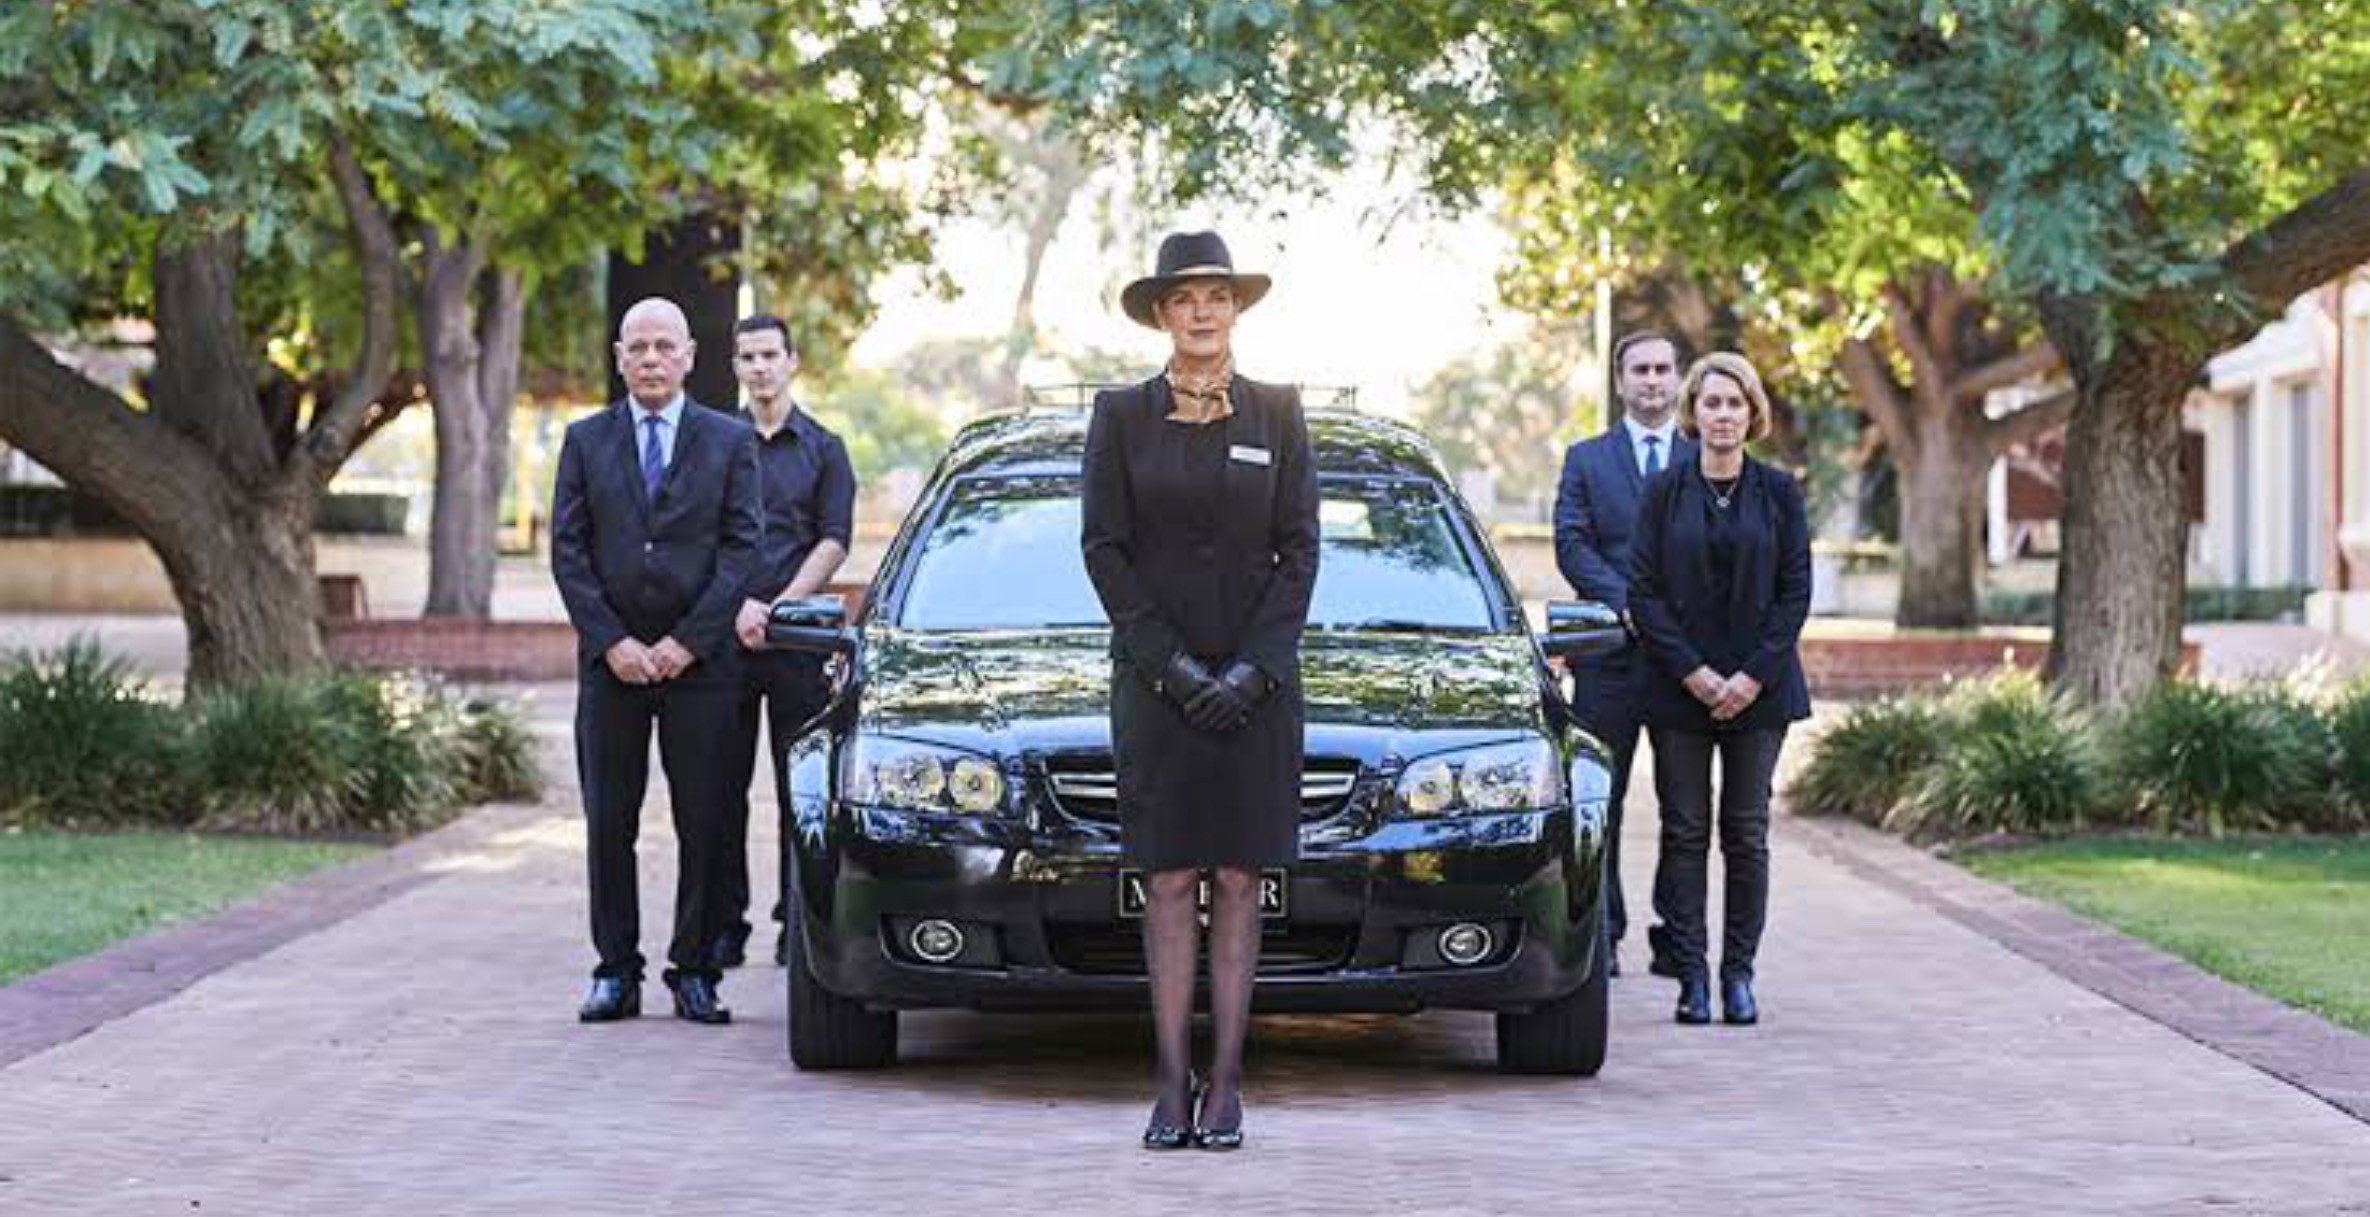 FUNERAL TRADITIONS: Walking In Front Of The Hearse